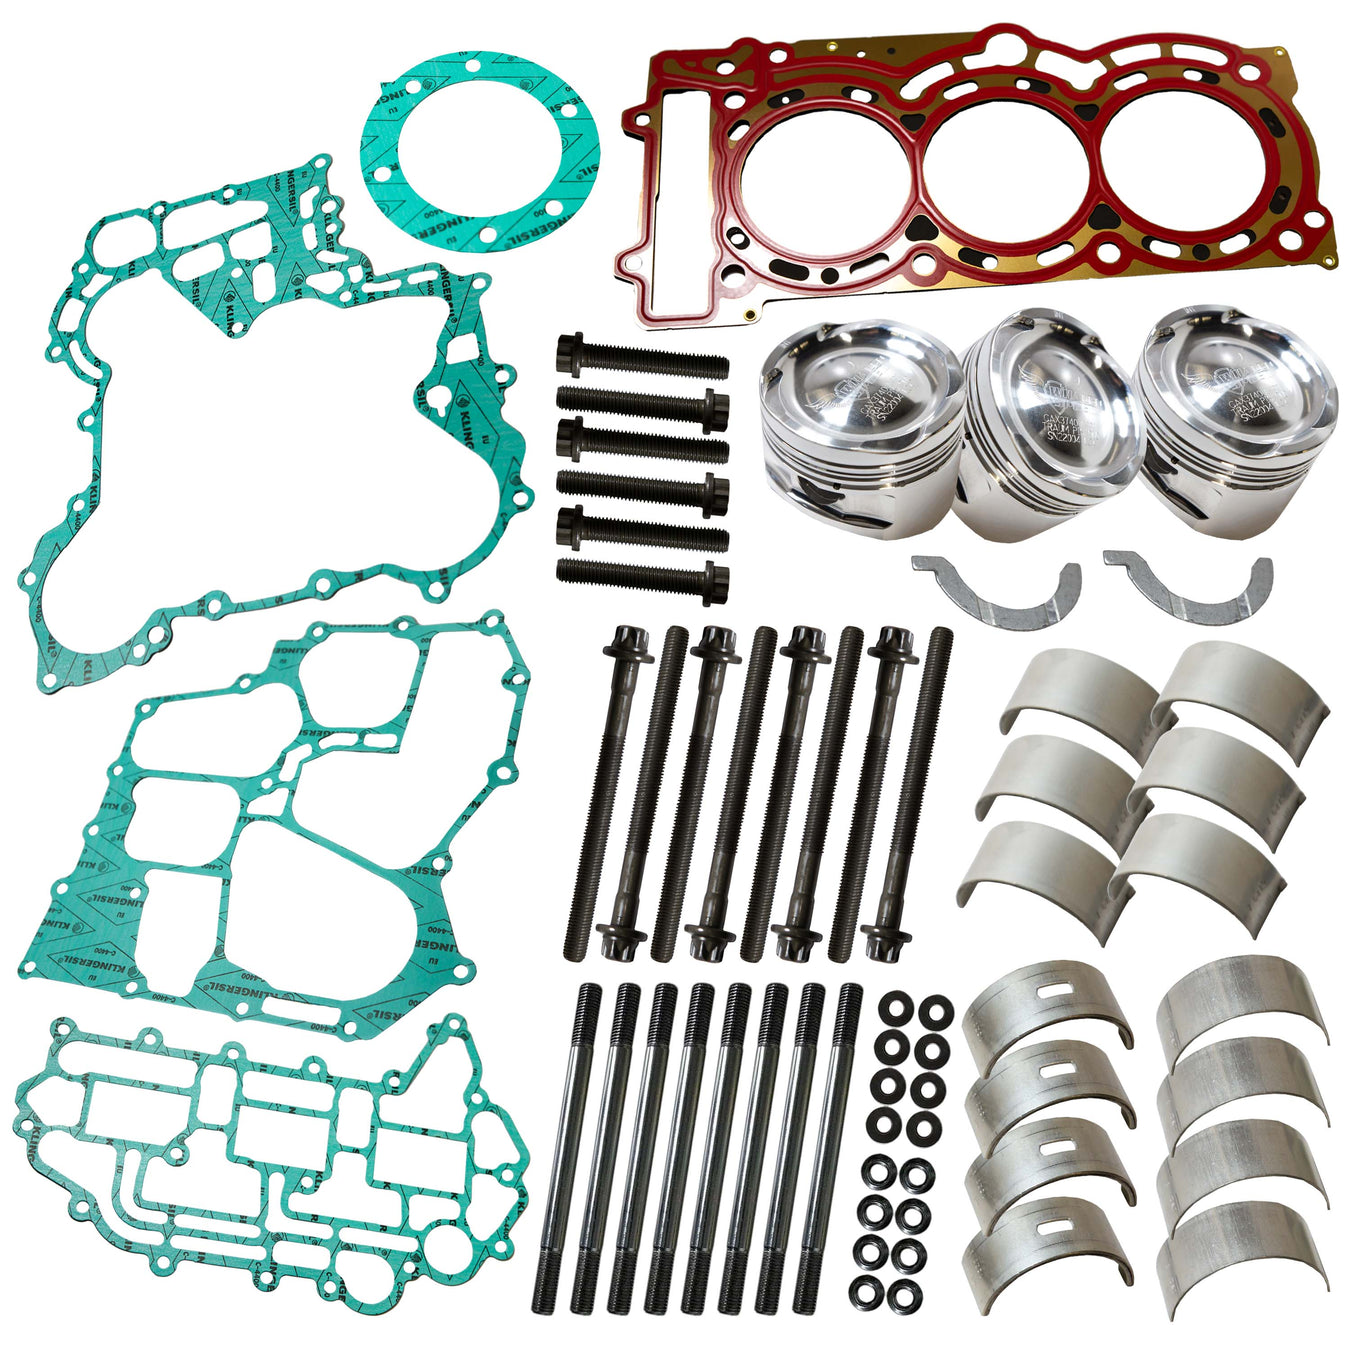 DIY Engine Packages, Parts, Services & Tools